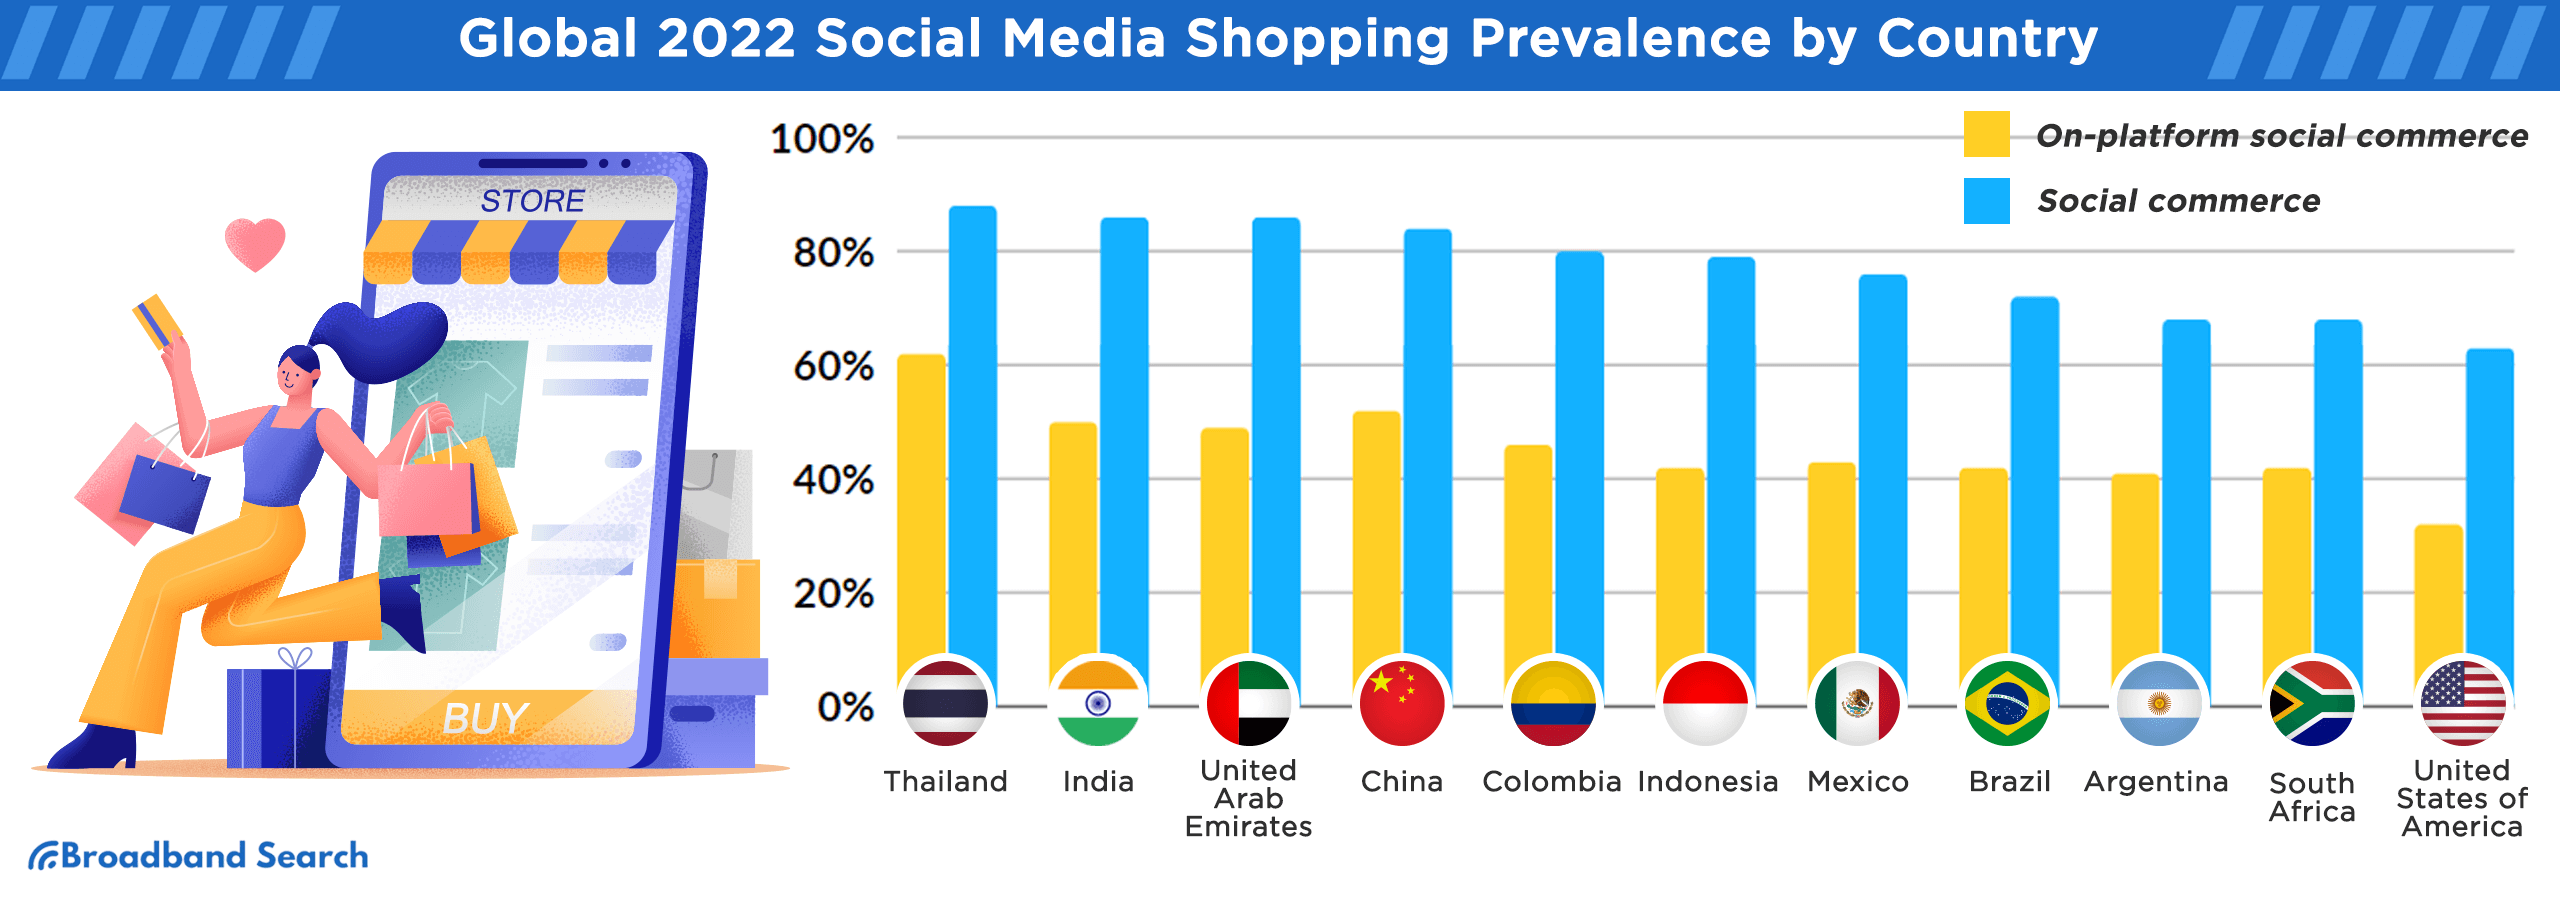 Global 2022 social media shopping prevalence by country